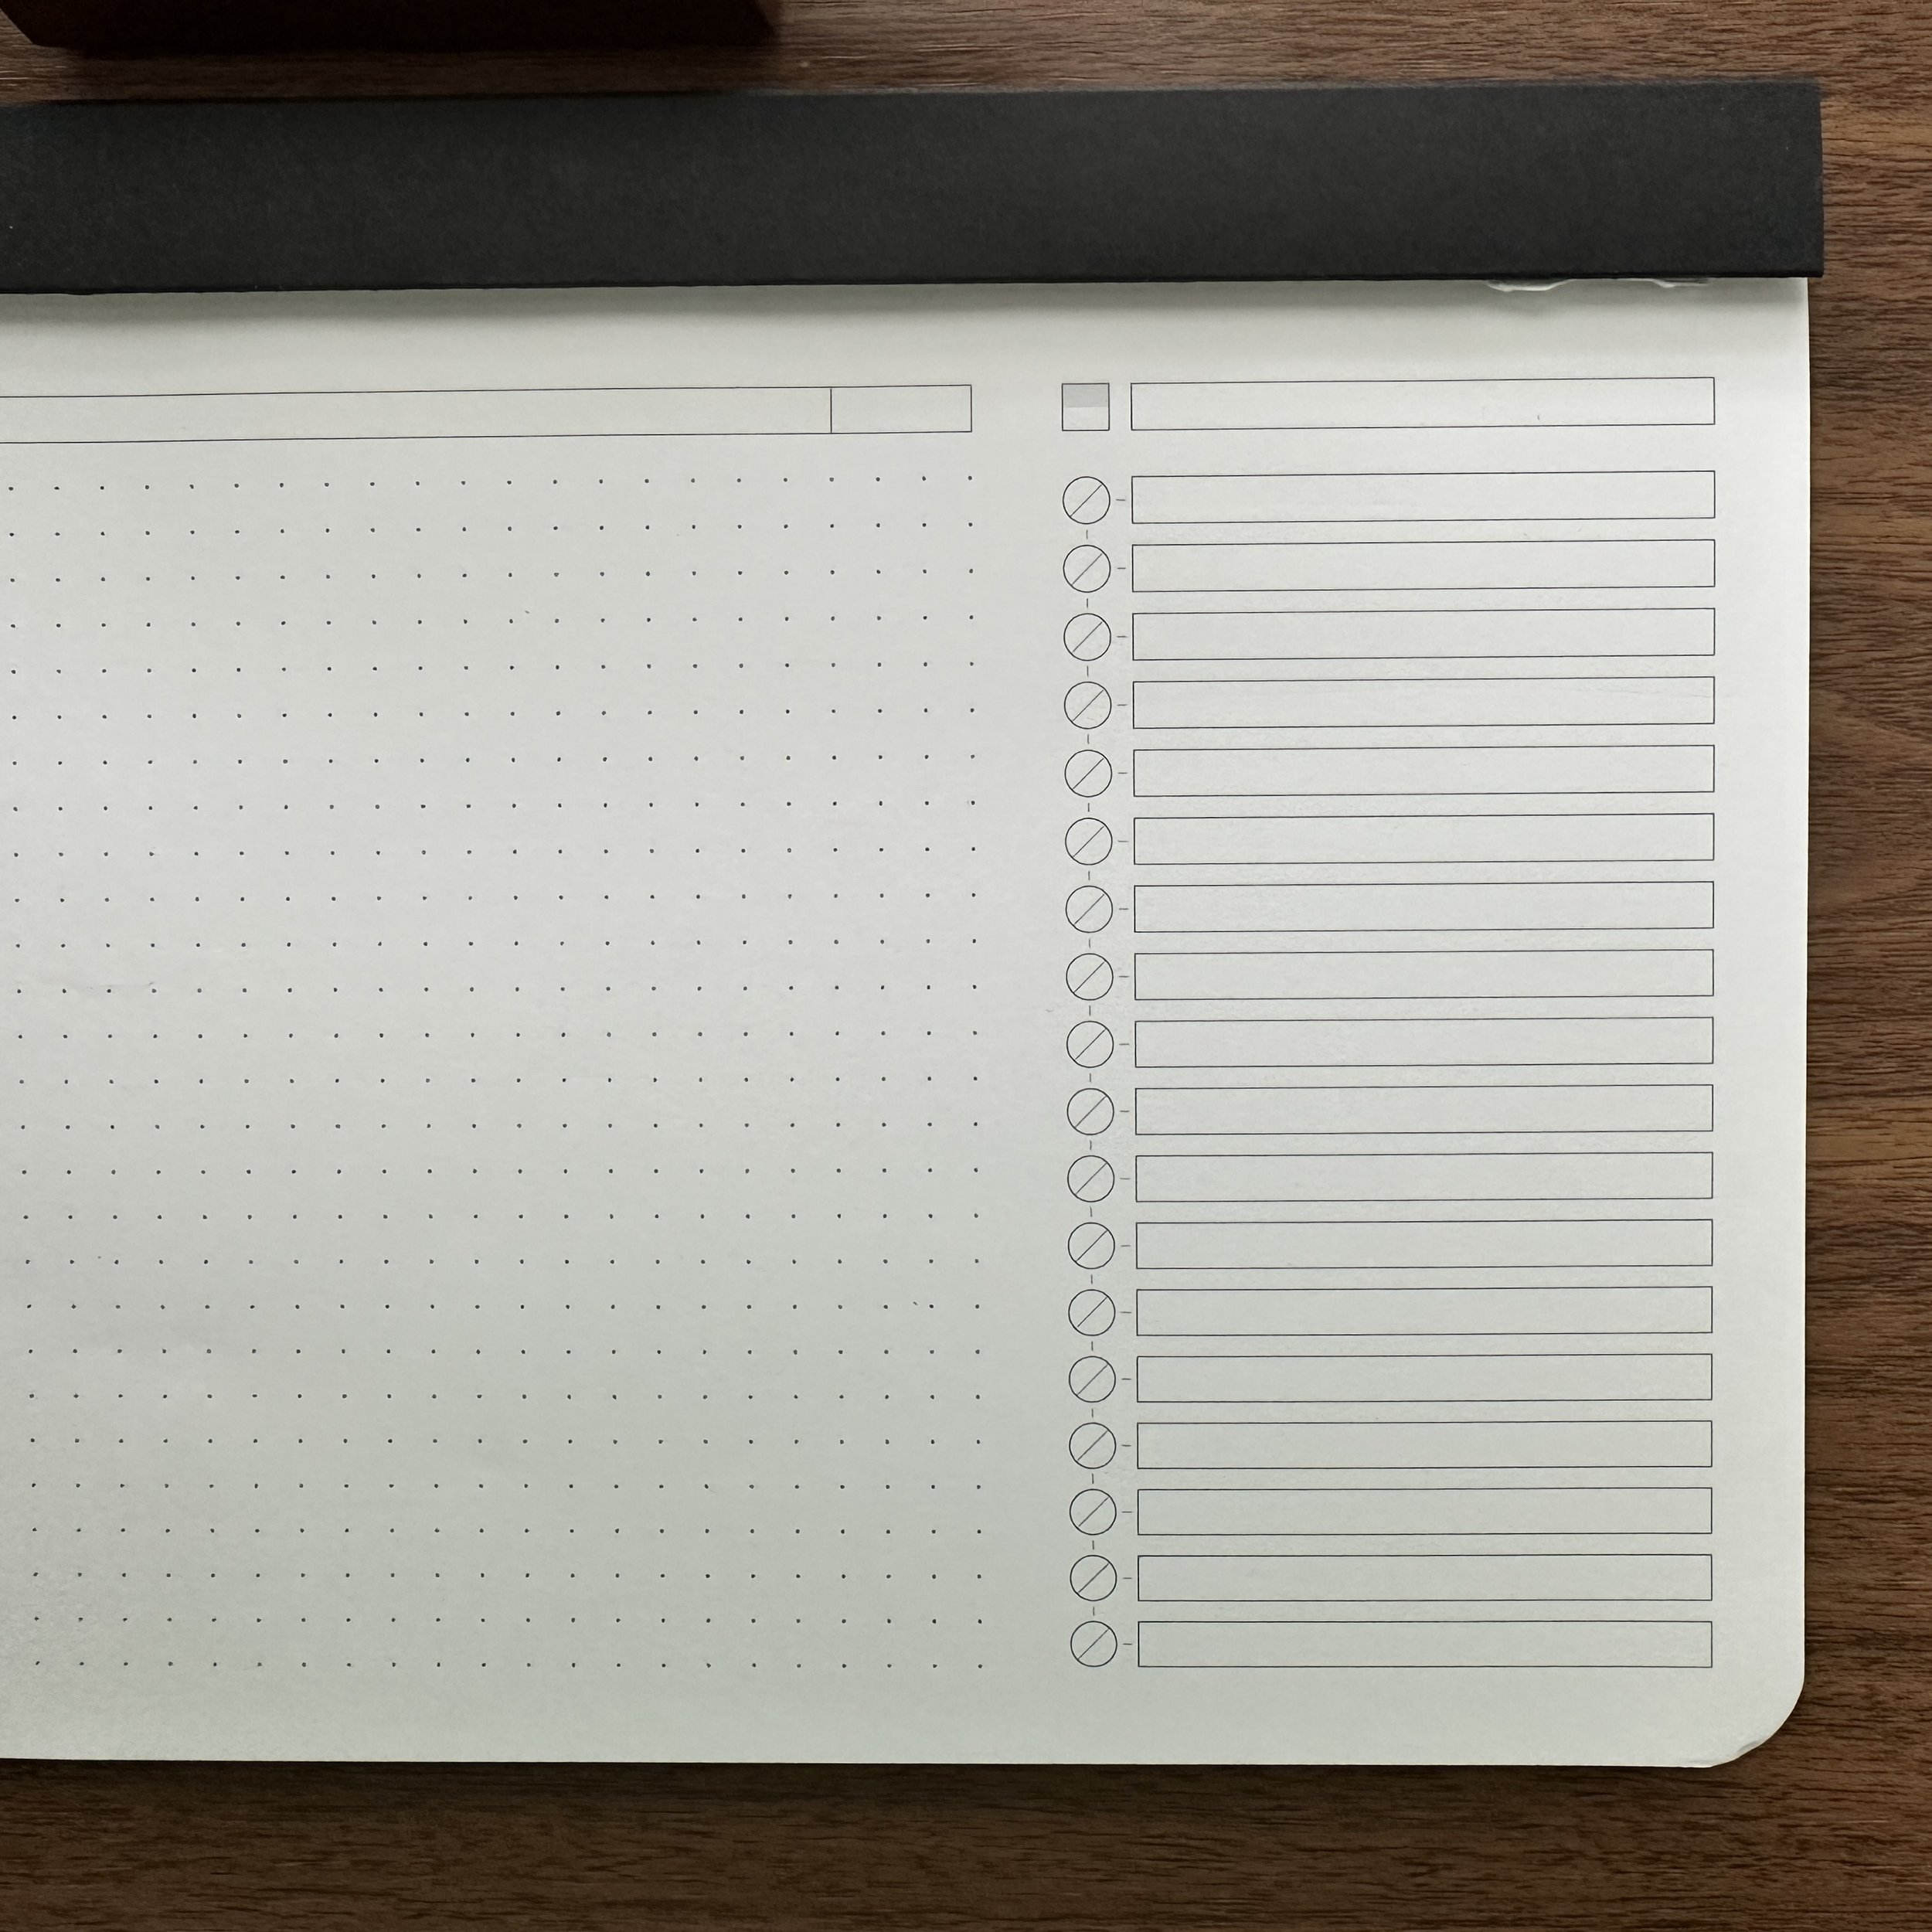 Clairefontaine Triomphe Writing Pads — The Gentleman Stationer